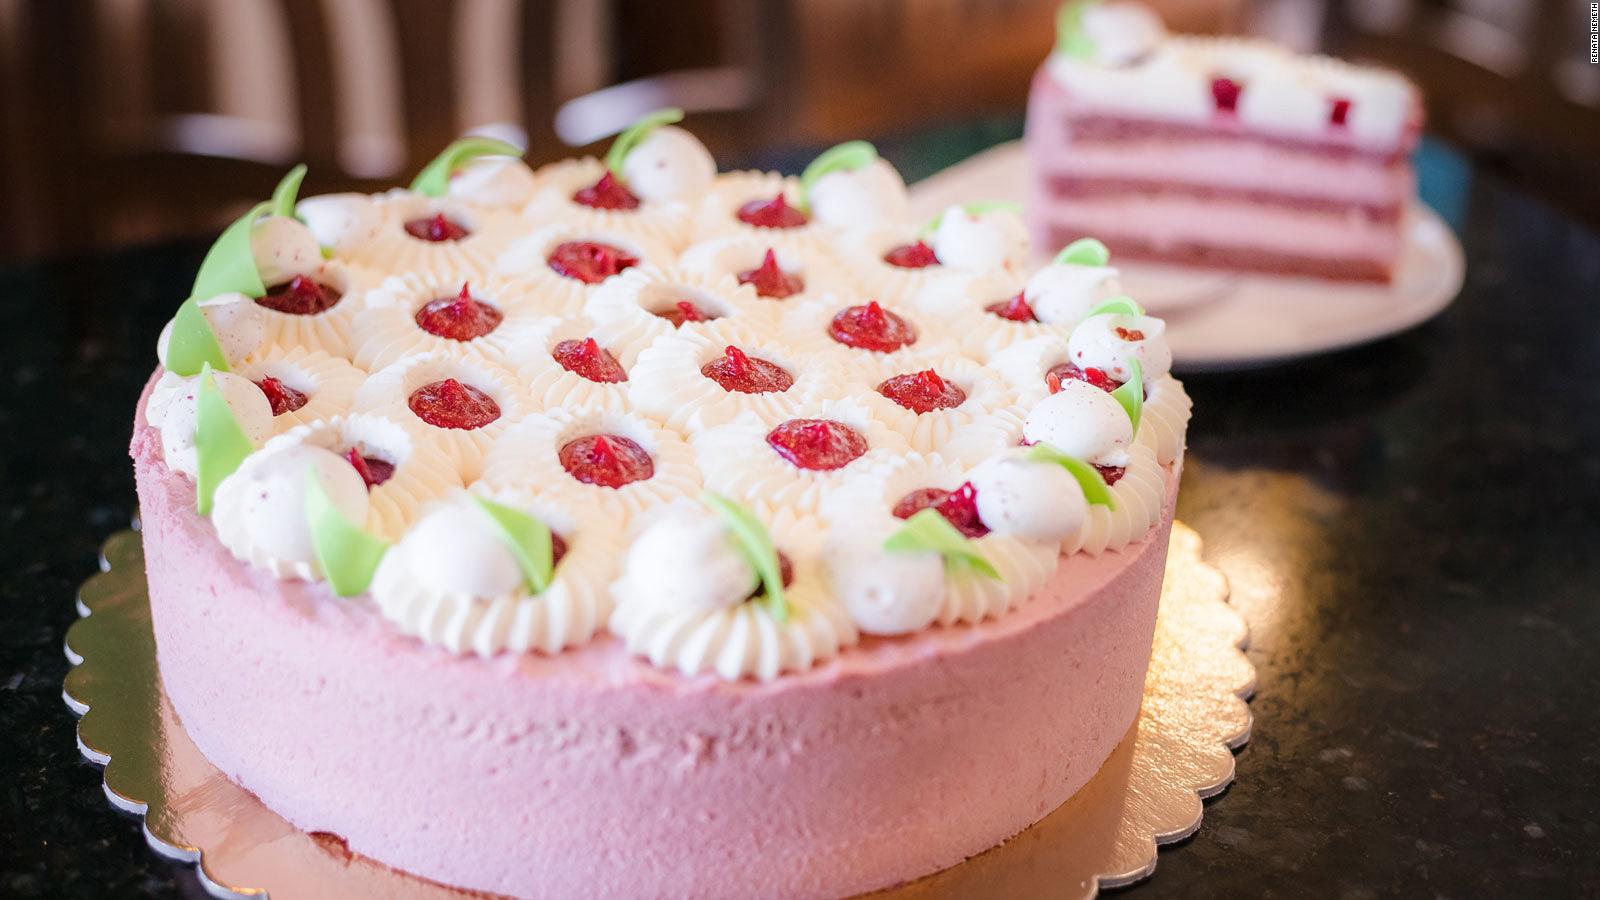 Why Are Cakes Perfect For Every Celebration?